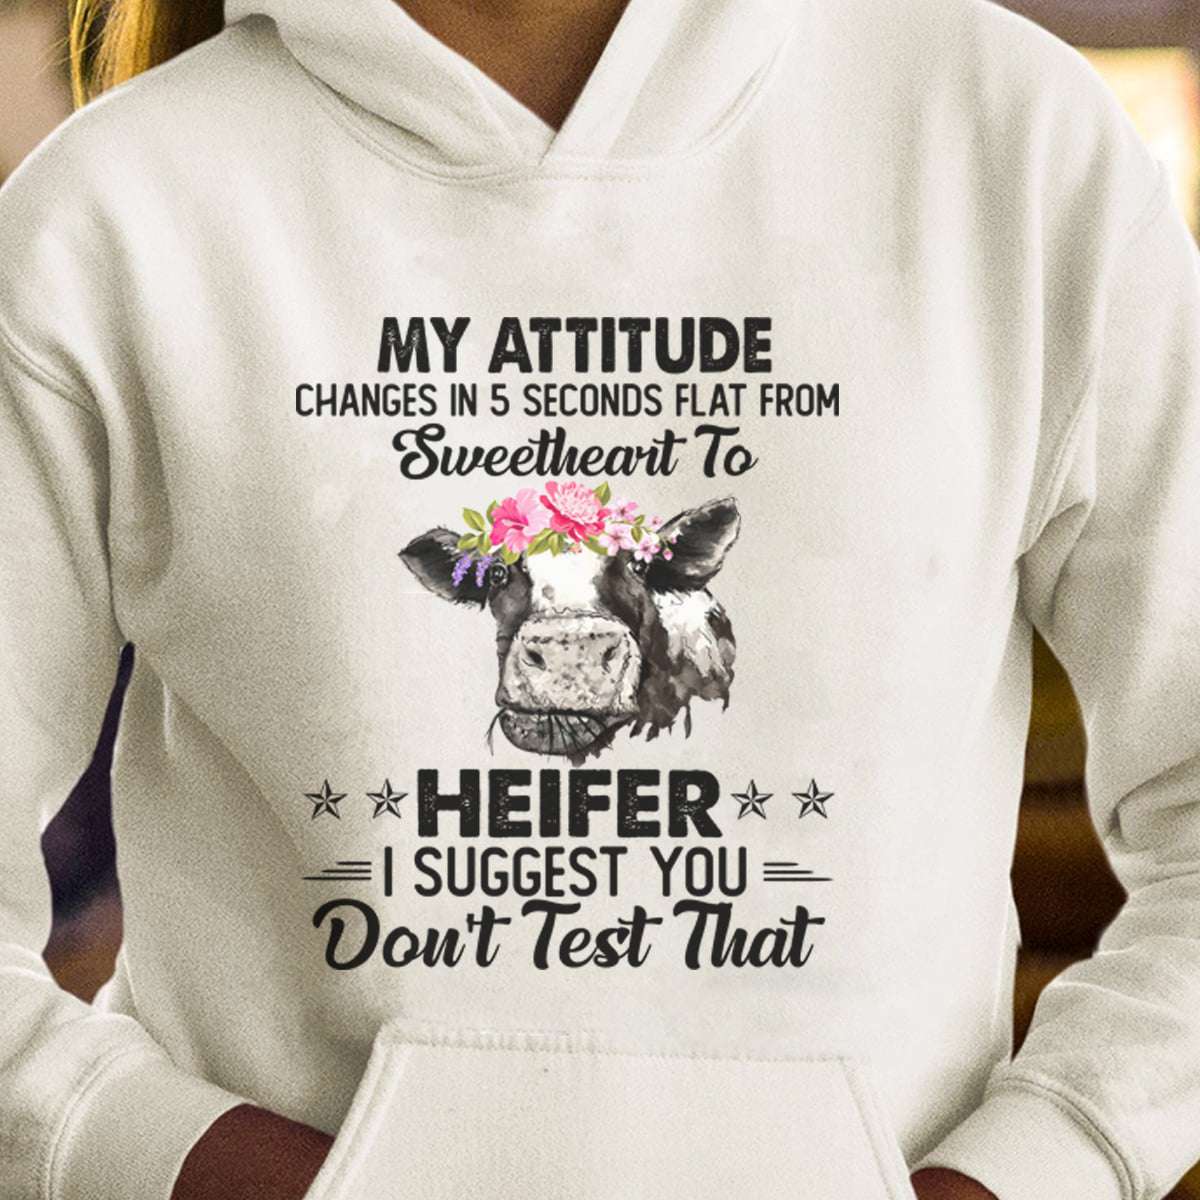 Sweetheart Heifer - My attitude changes in 5 seconds flat from sweetheart to heifer i suggest you don't test that